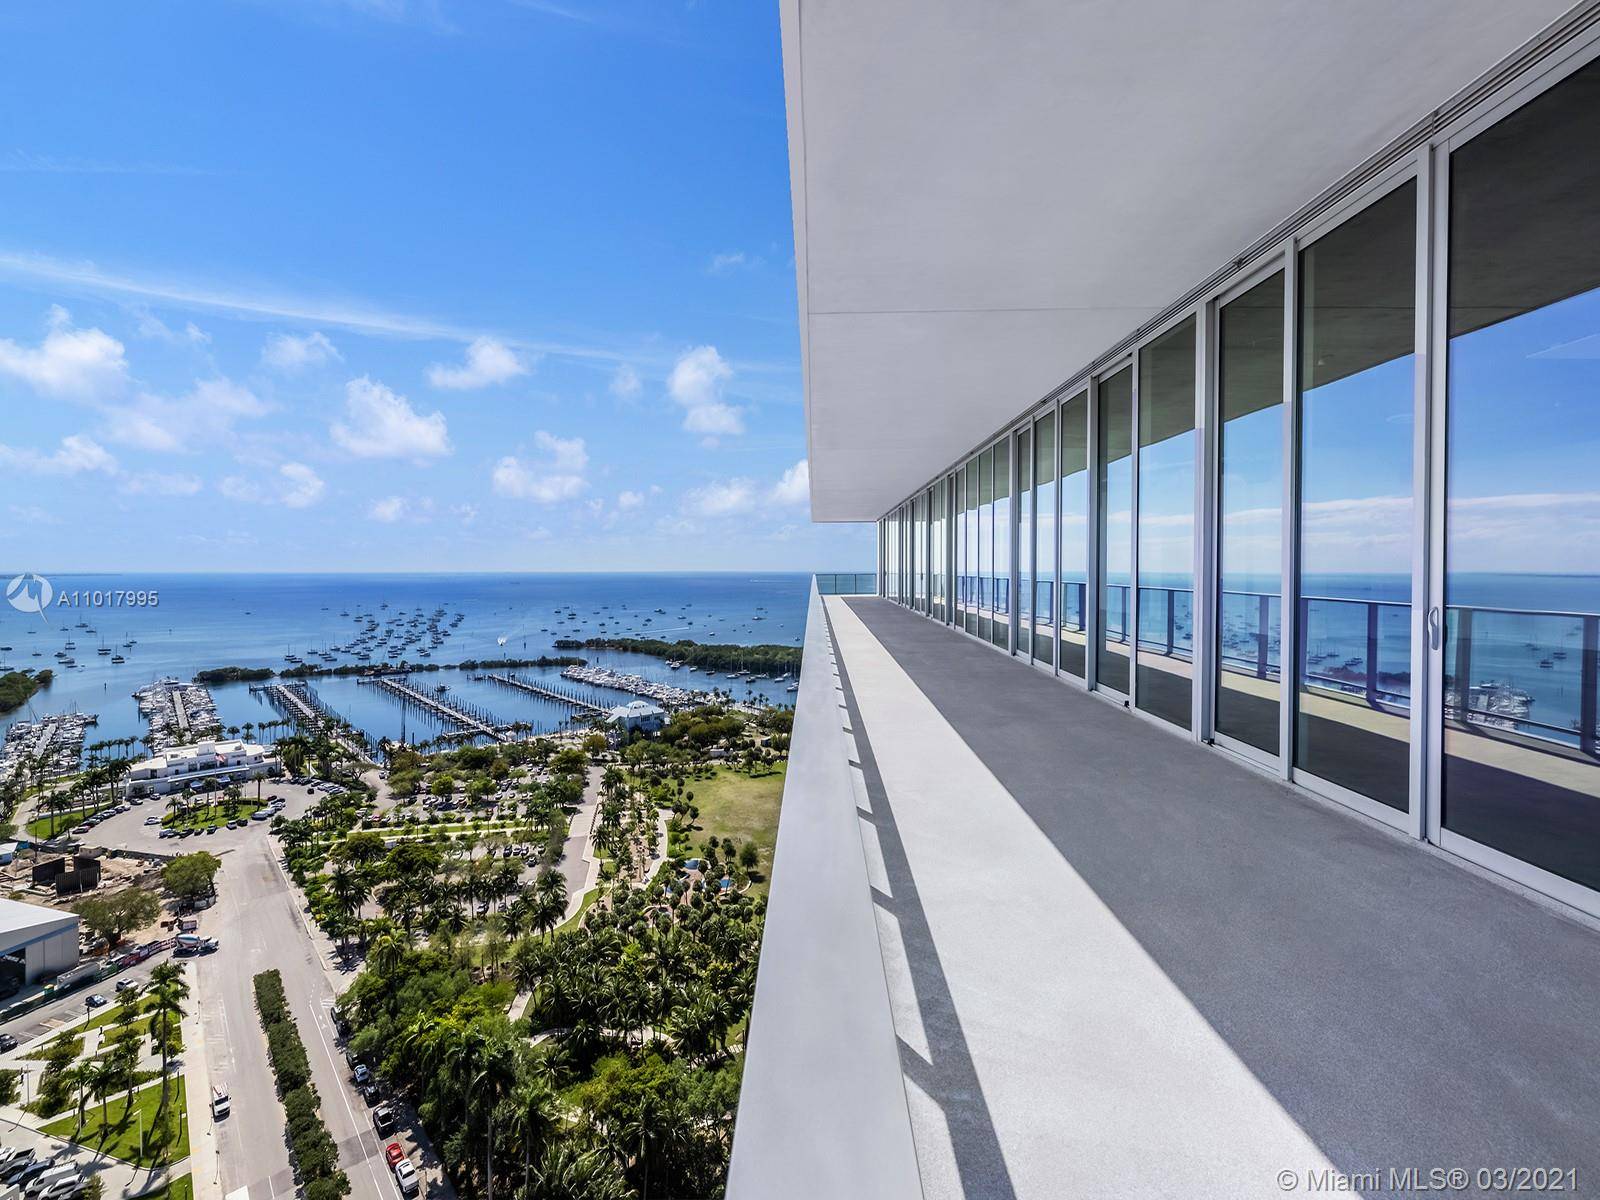 This full floor penthouse at Grove at Grand Bay has been conceptualized by Tamara Feldman Design to instill depth and character to this architectural marvel by Bjarke Ingels which twists ...